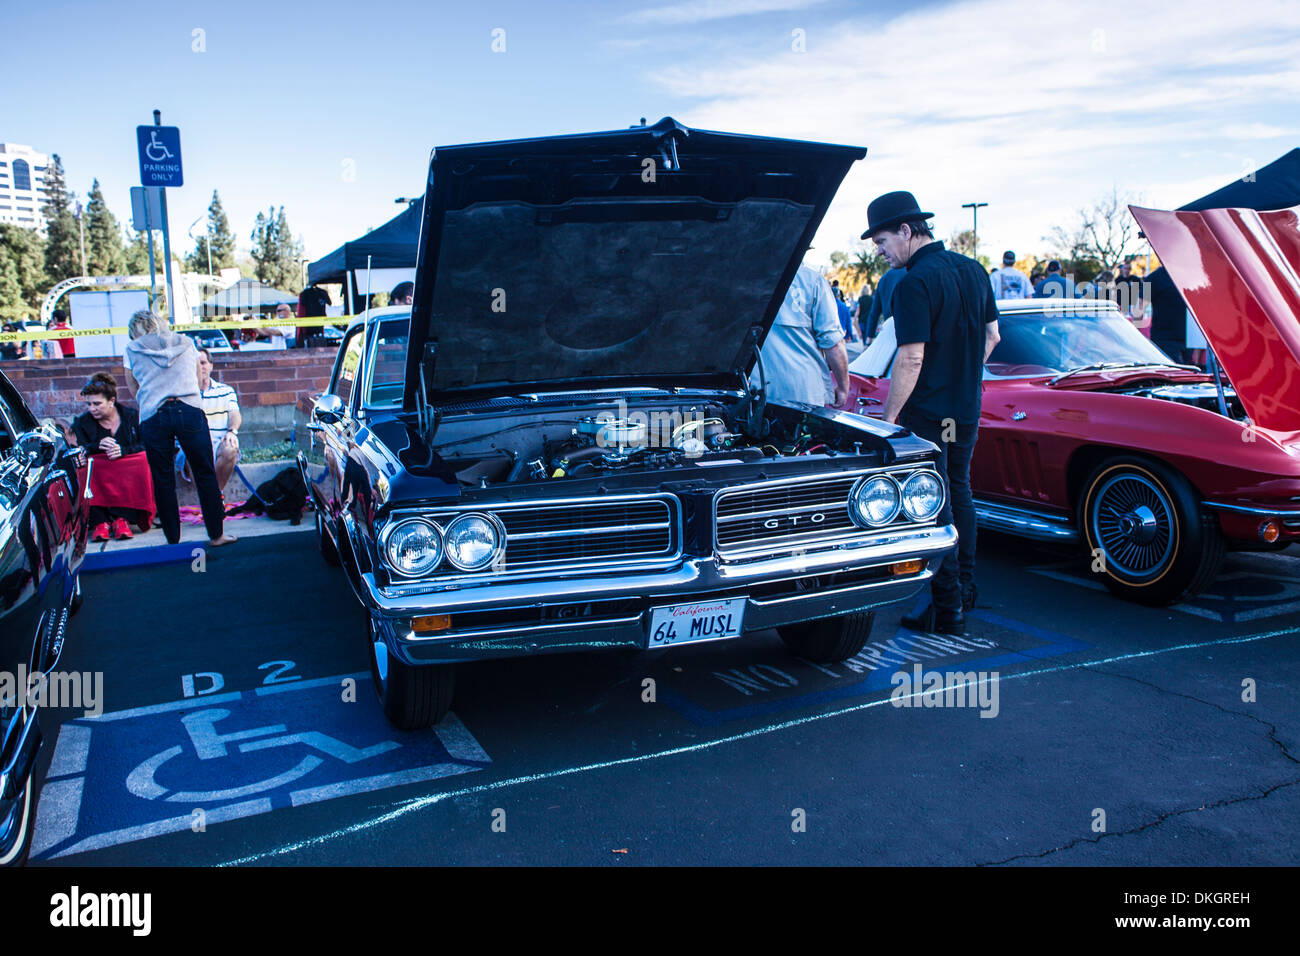 A 1964 Pontiac GTO at the Motor4toys event in Woodland Hills California Stock Photo